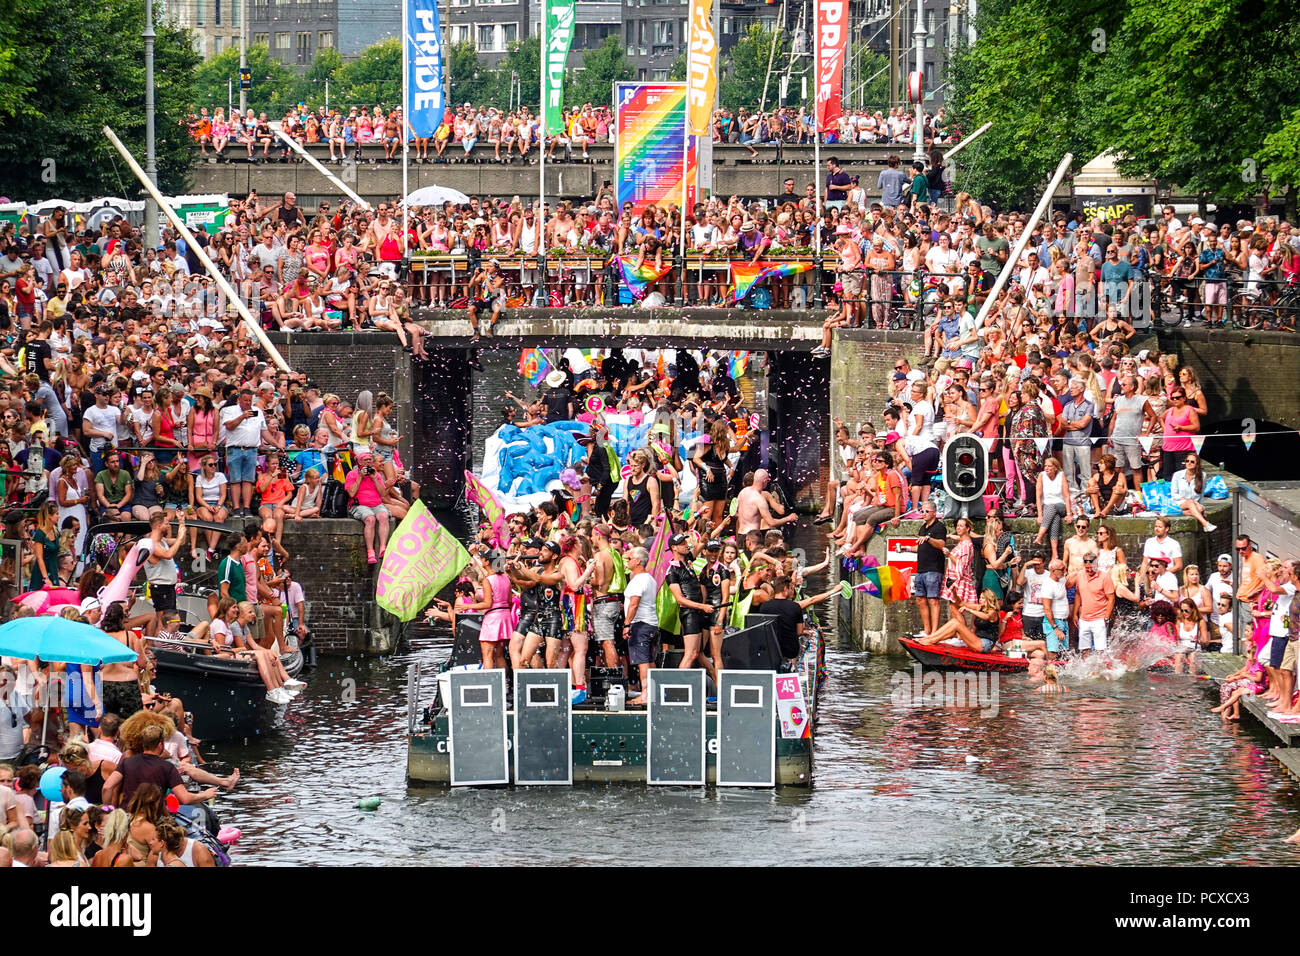 Amsterdam, Netherlands. August 4, 2018, Hundreds of thousands of visitors lined the canals for the annual Canal Pride. Credit: Wiskerke/Alamy Live News Stock Photo